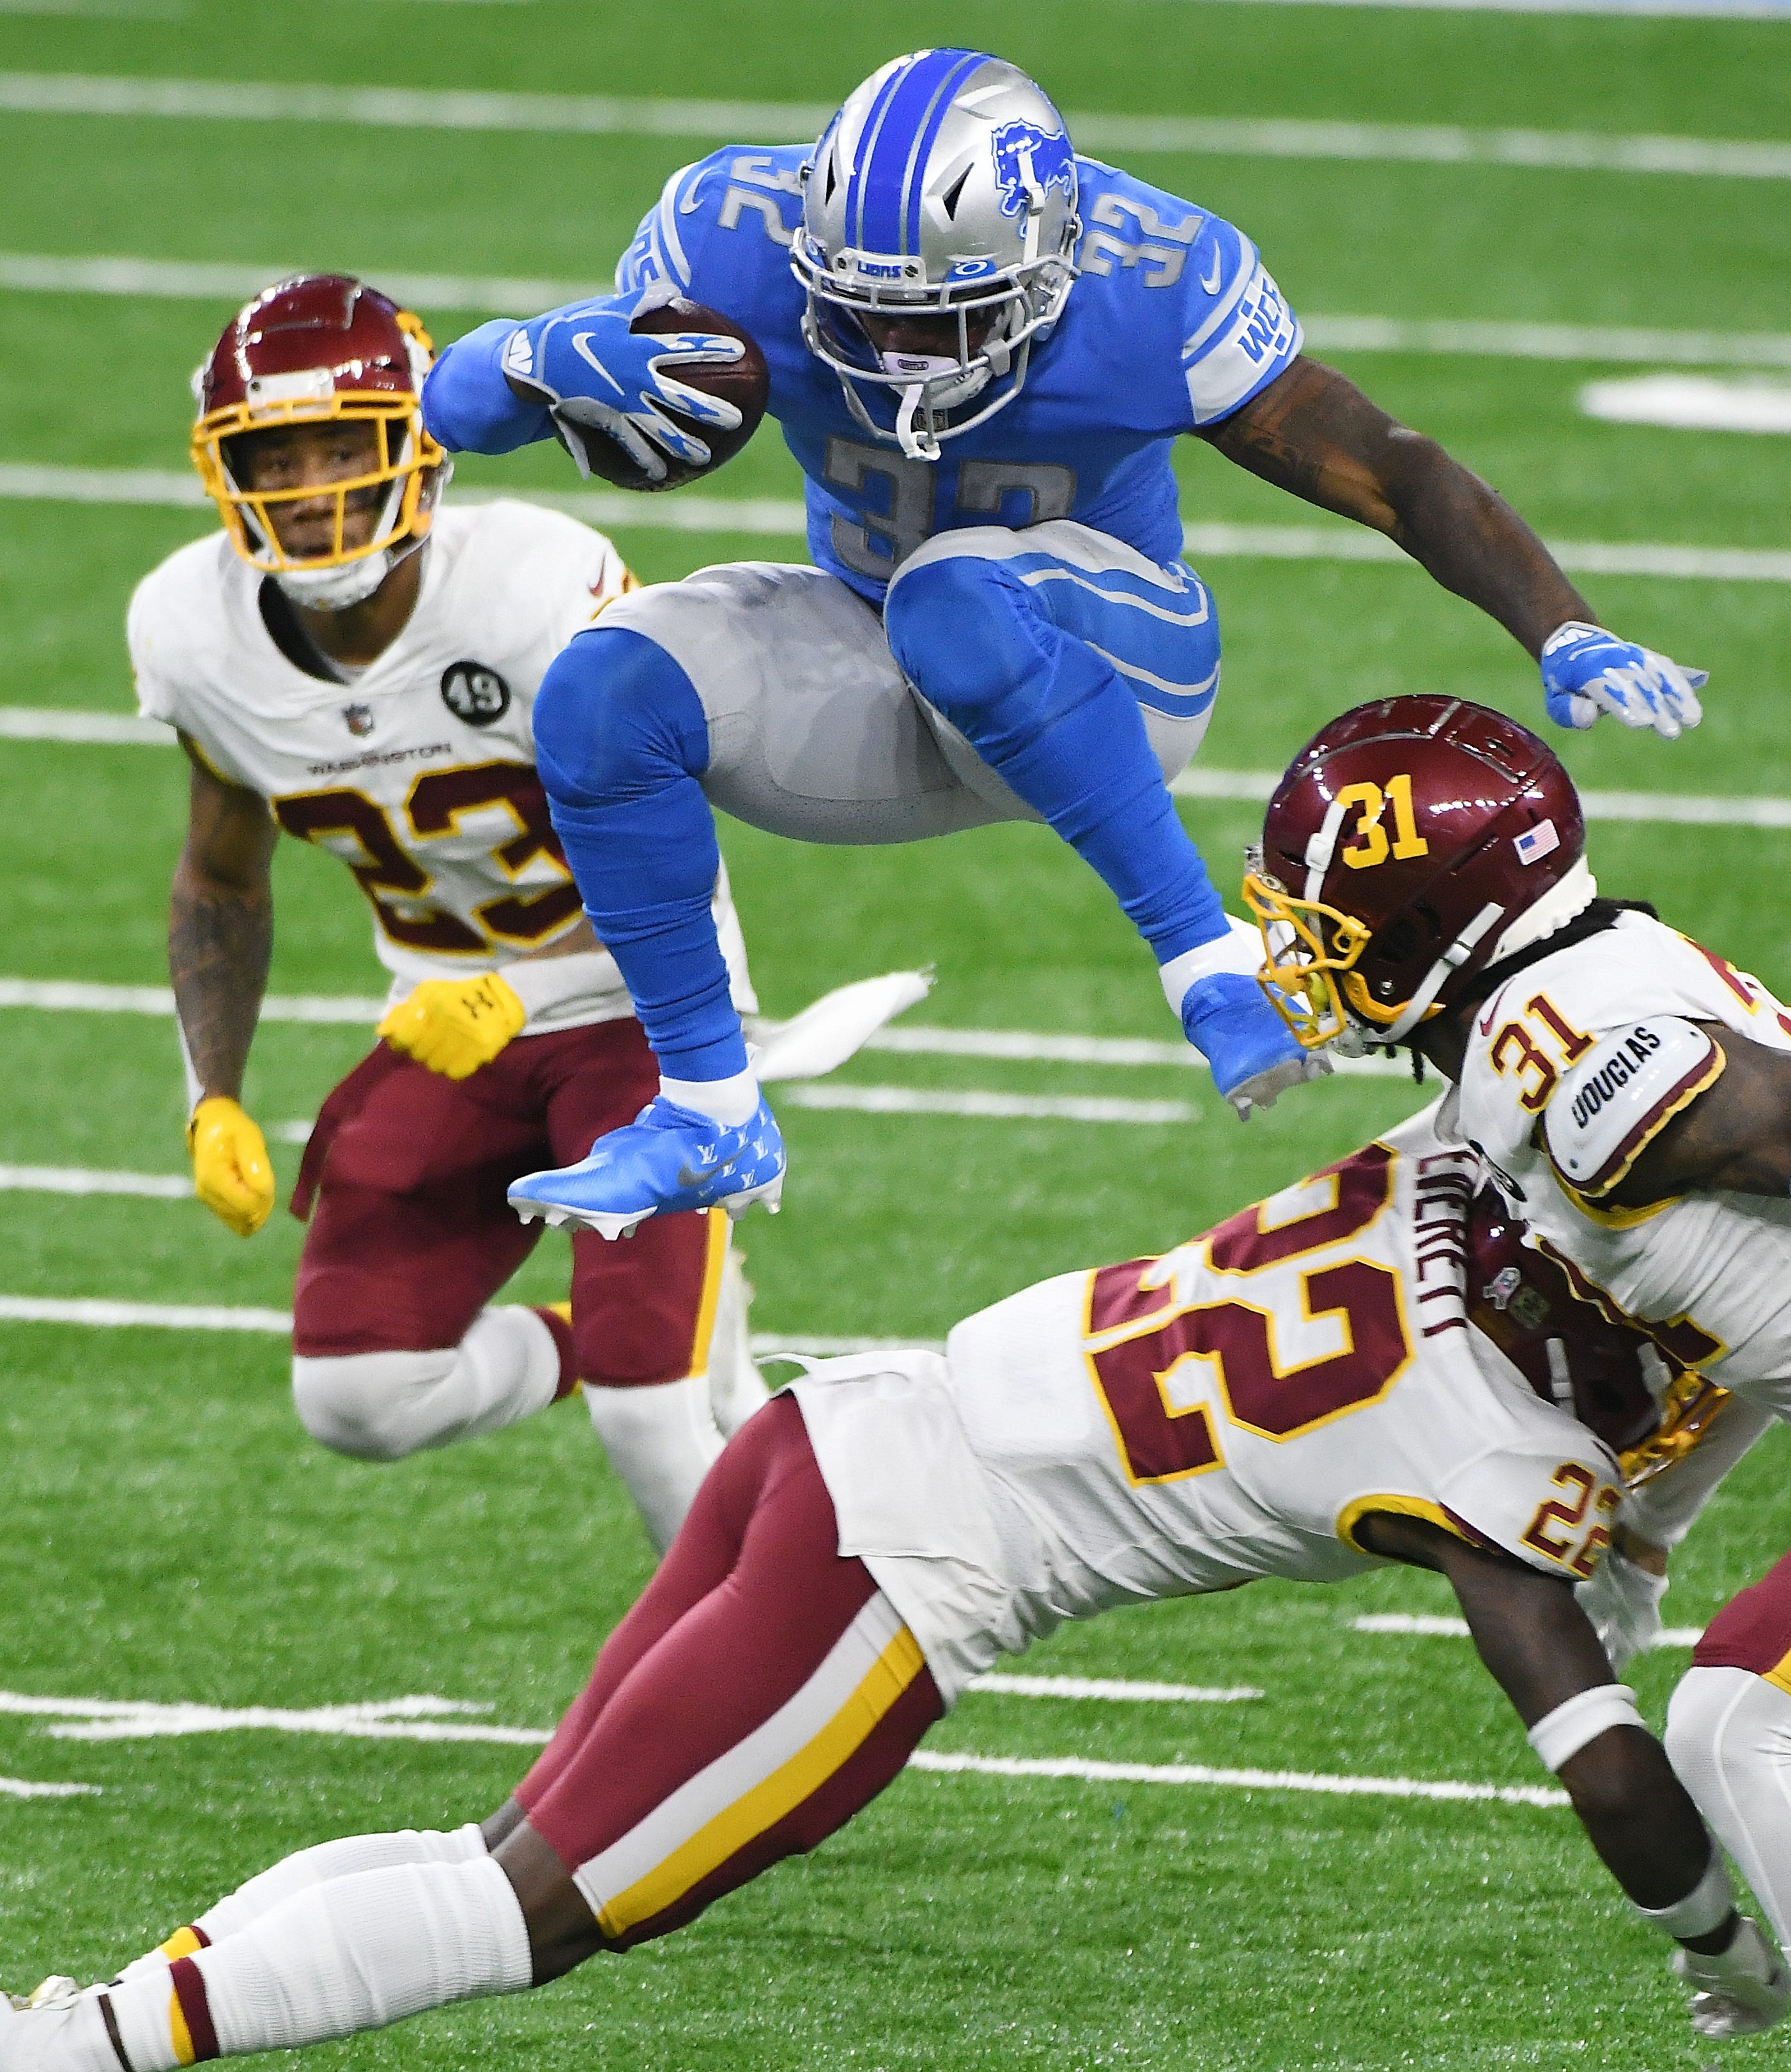 Lions running back D'Andre Swift hurdles Washington's Deshazor Everett on a run in the first quarter of Detroit's 30-27 victory at Ford Field in Detroit on Nov. 15, 2020.